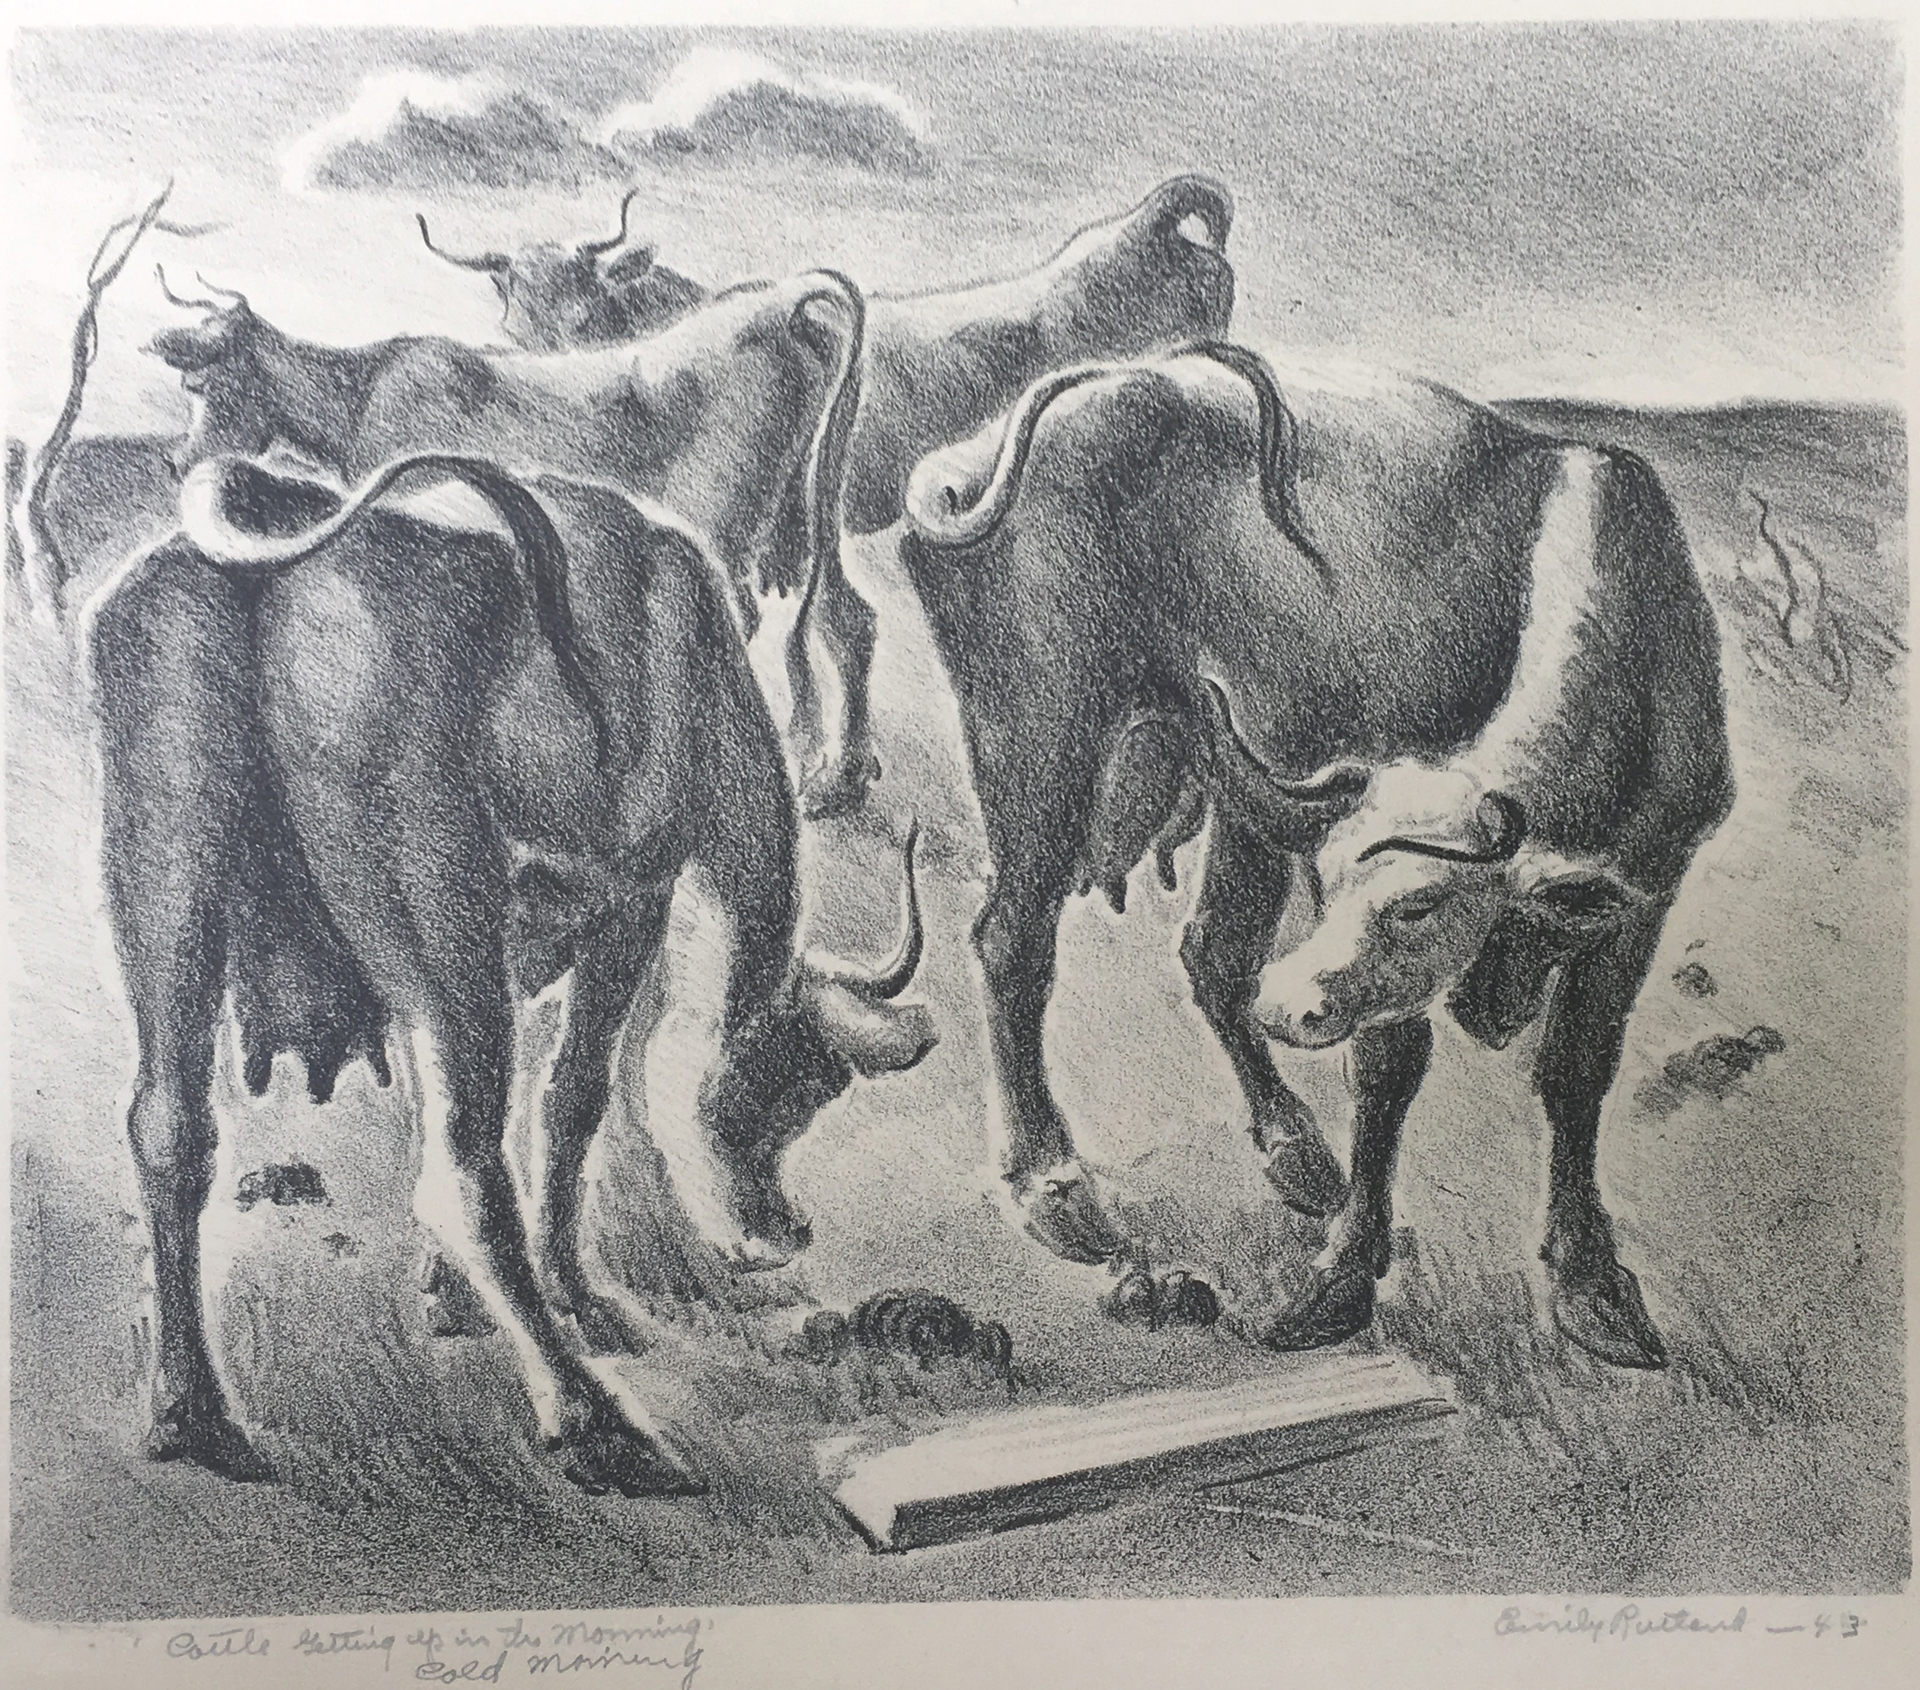 Cattle Getting Up, Cold Morning by Emily Rutland